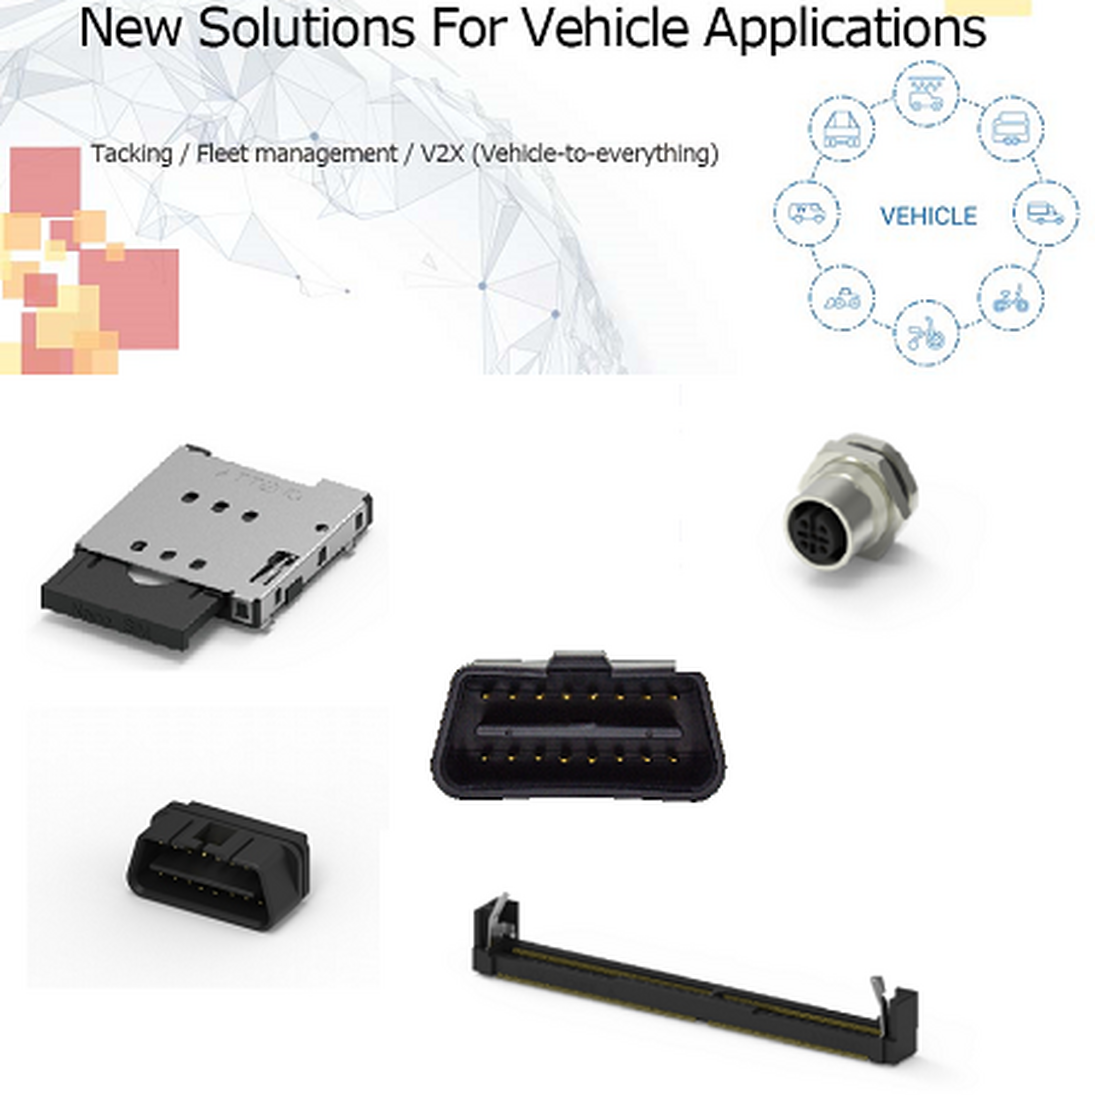 Attend vehicle solutions